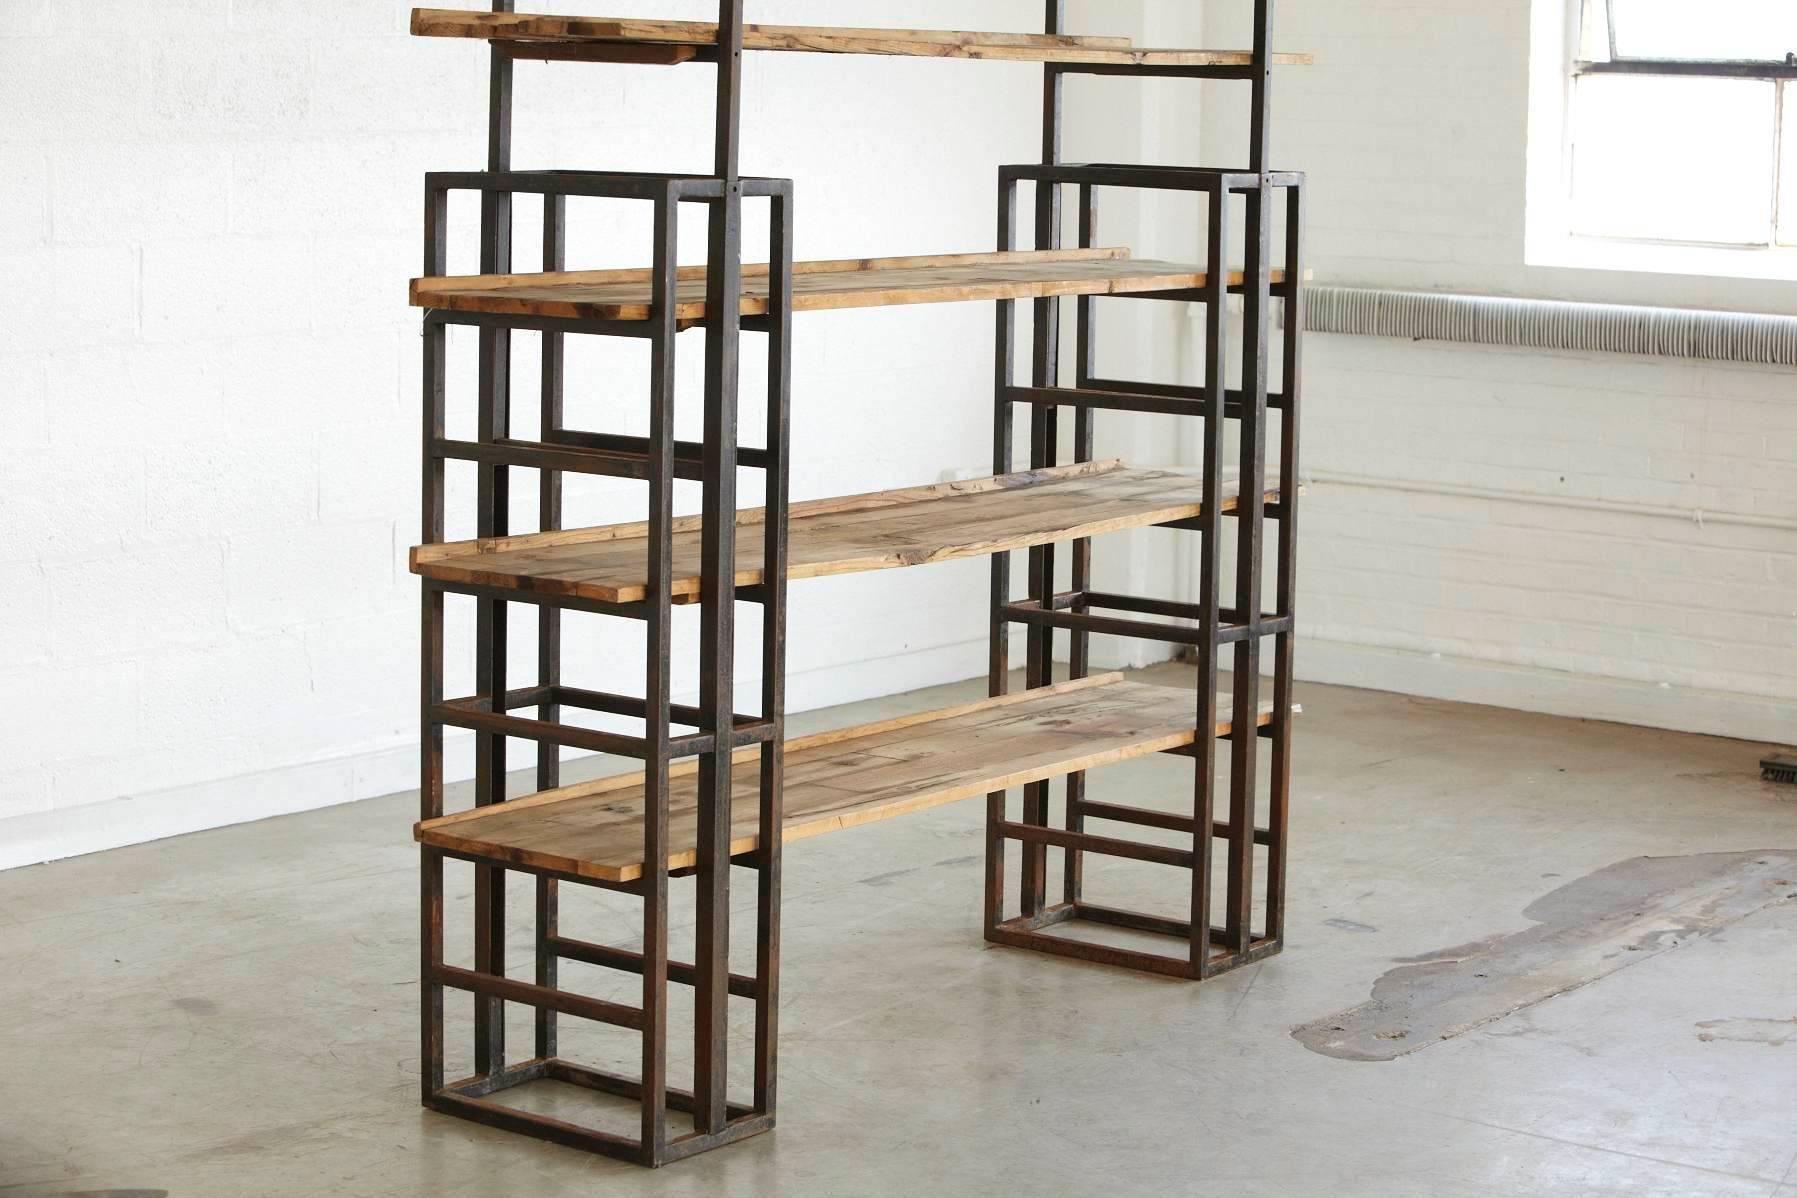 Custom-Made Adjustable Industrial Style Steel and Wood Plank Etagere In Good Condition For Sale In Aramits, Nouvelle-Aquitaine